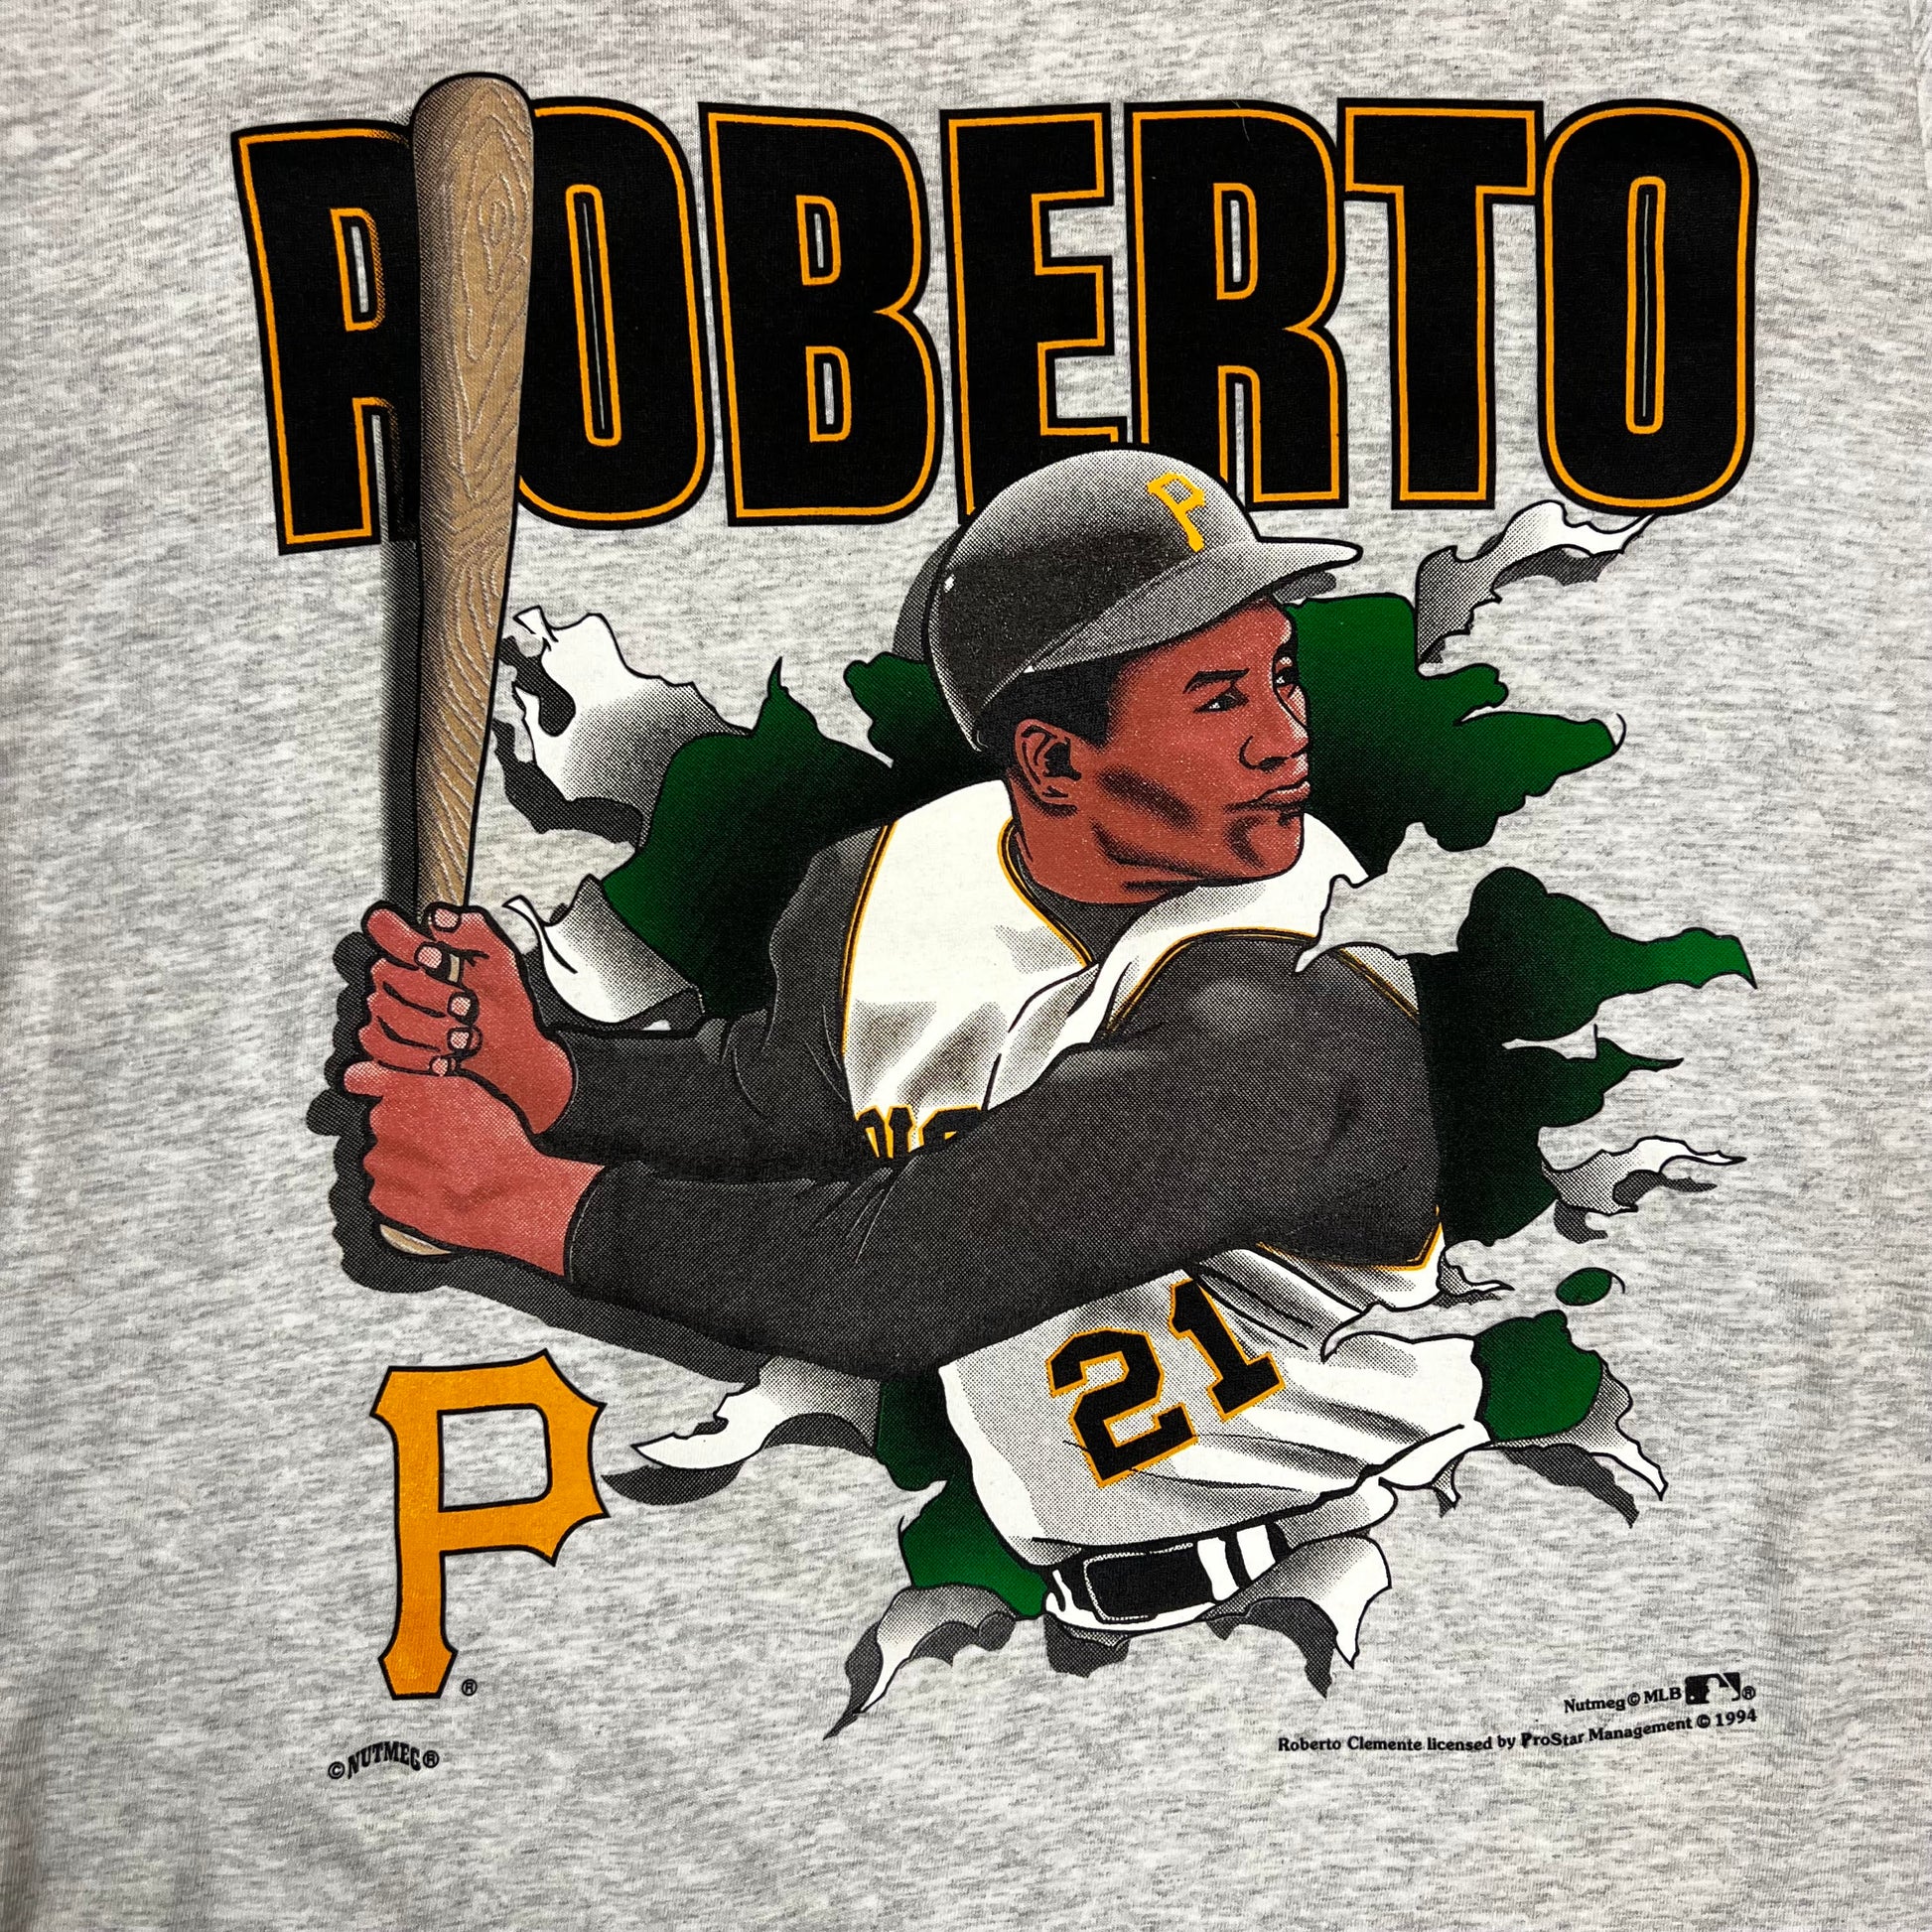 Vintage 1994 Pittsburgh Pirates Roberto Clemente Double Sided Tee - La –  Stardust Skate Shop